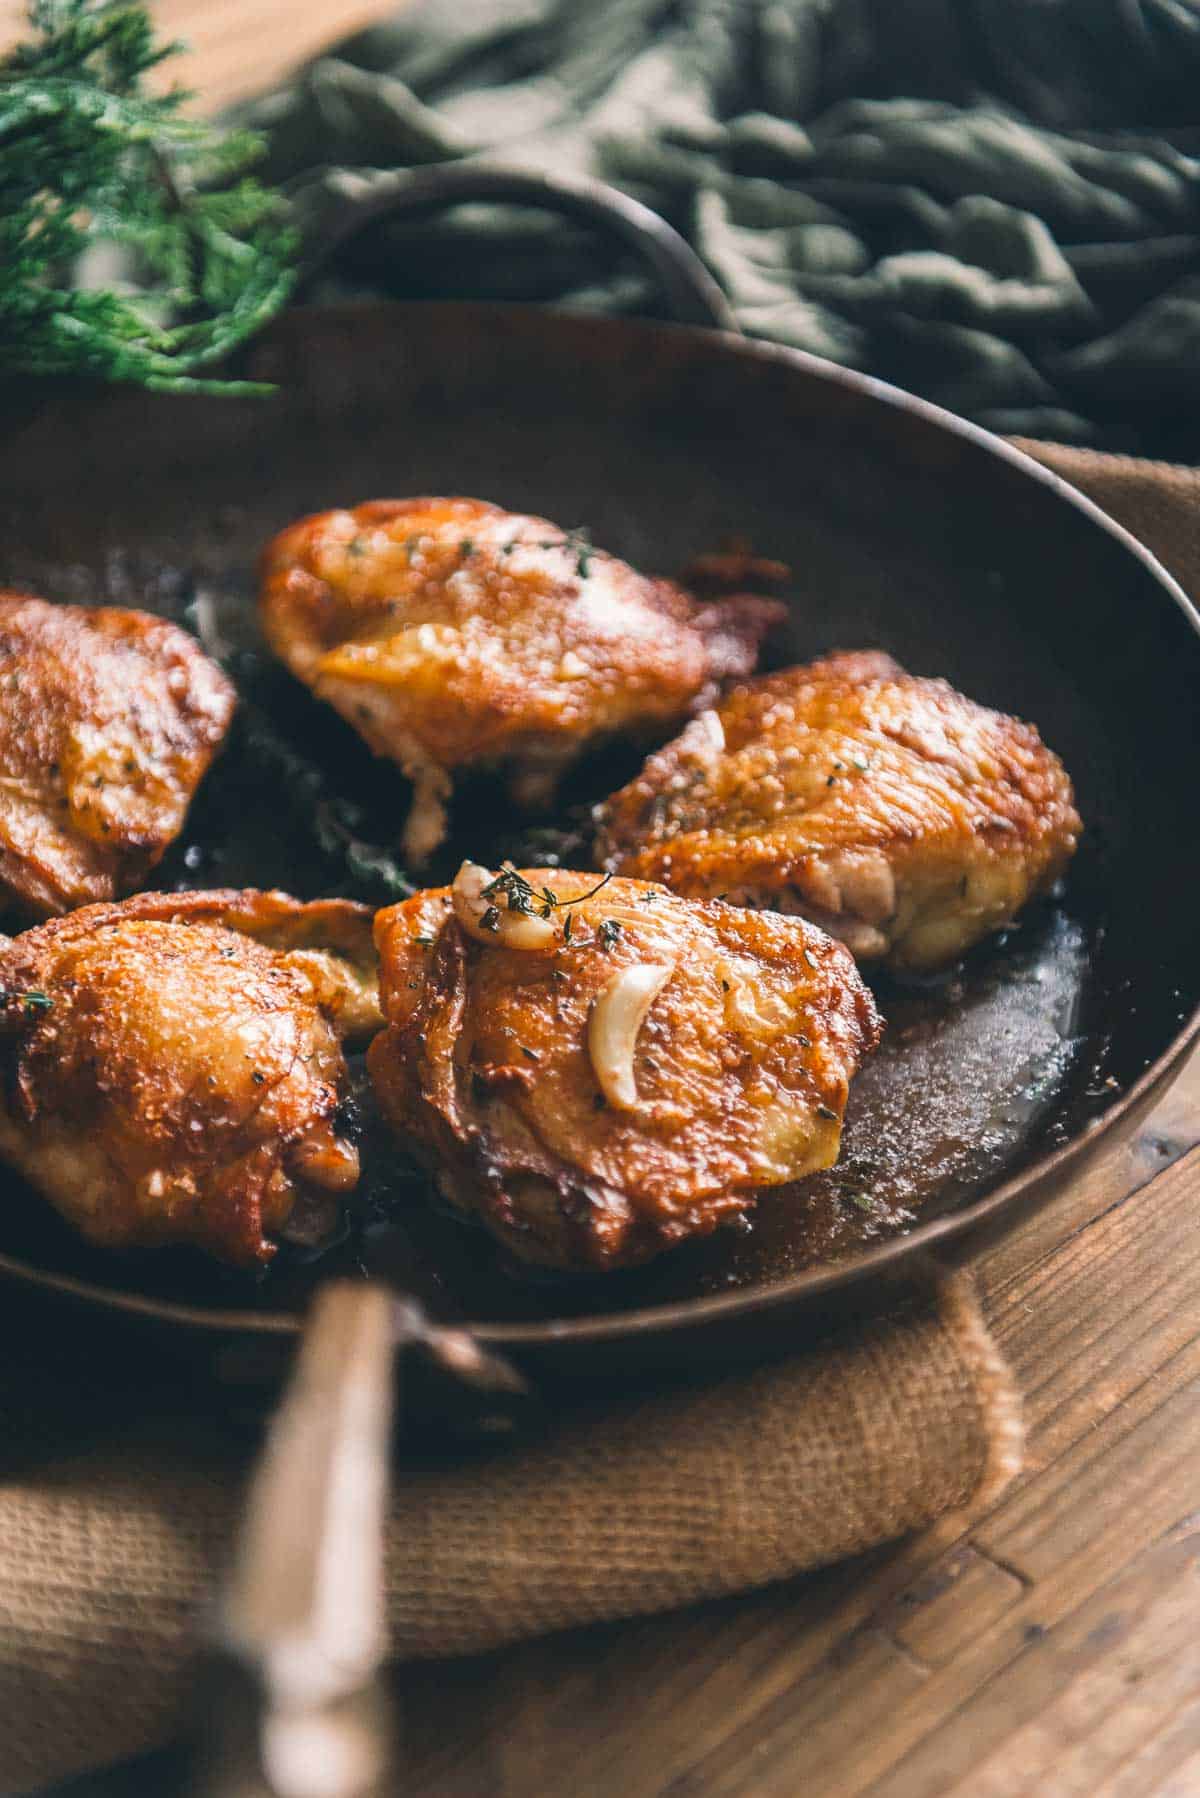 Pan seared chicken thighs in a skillet on a wooden table.